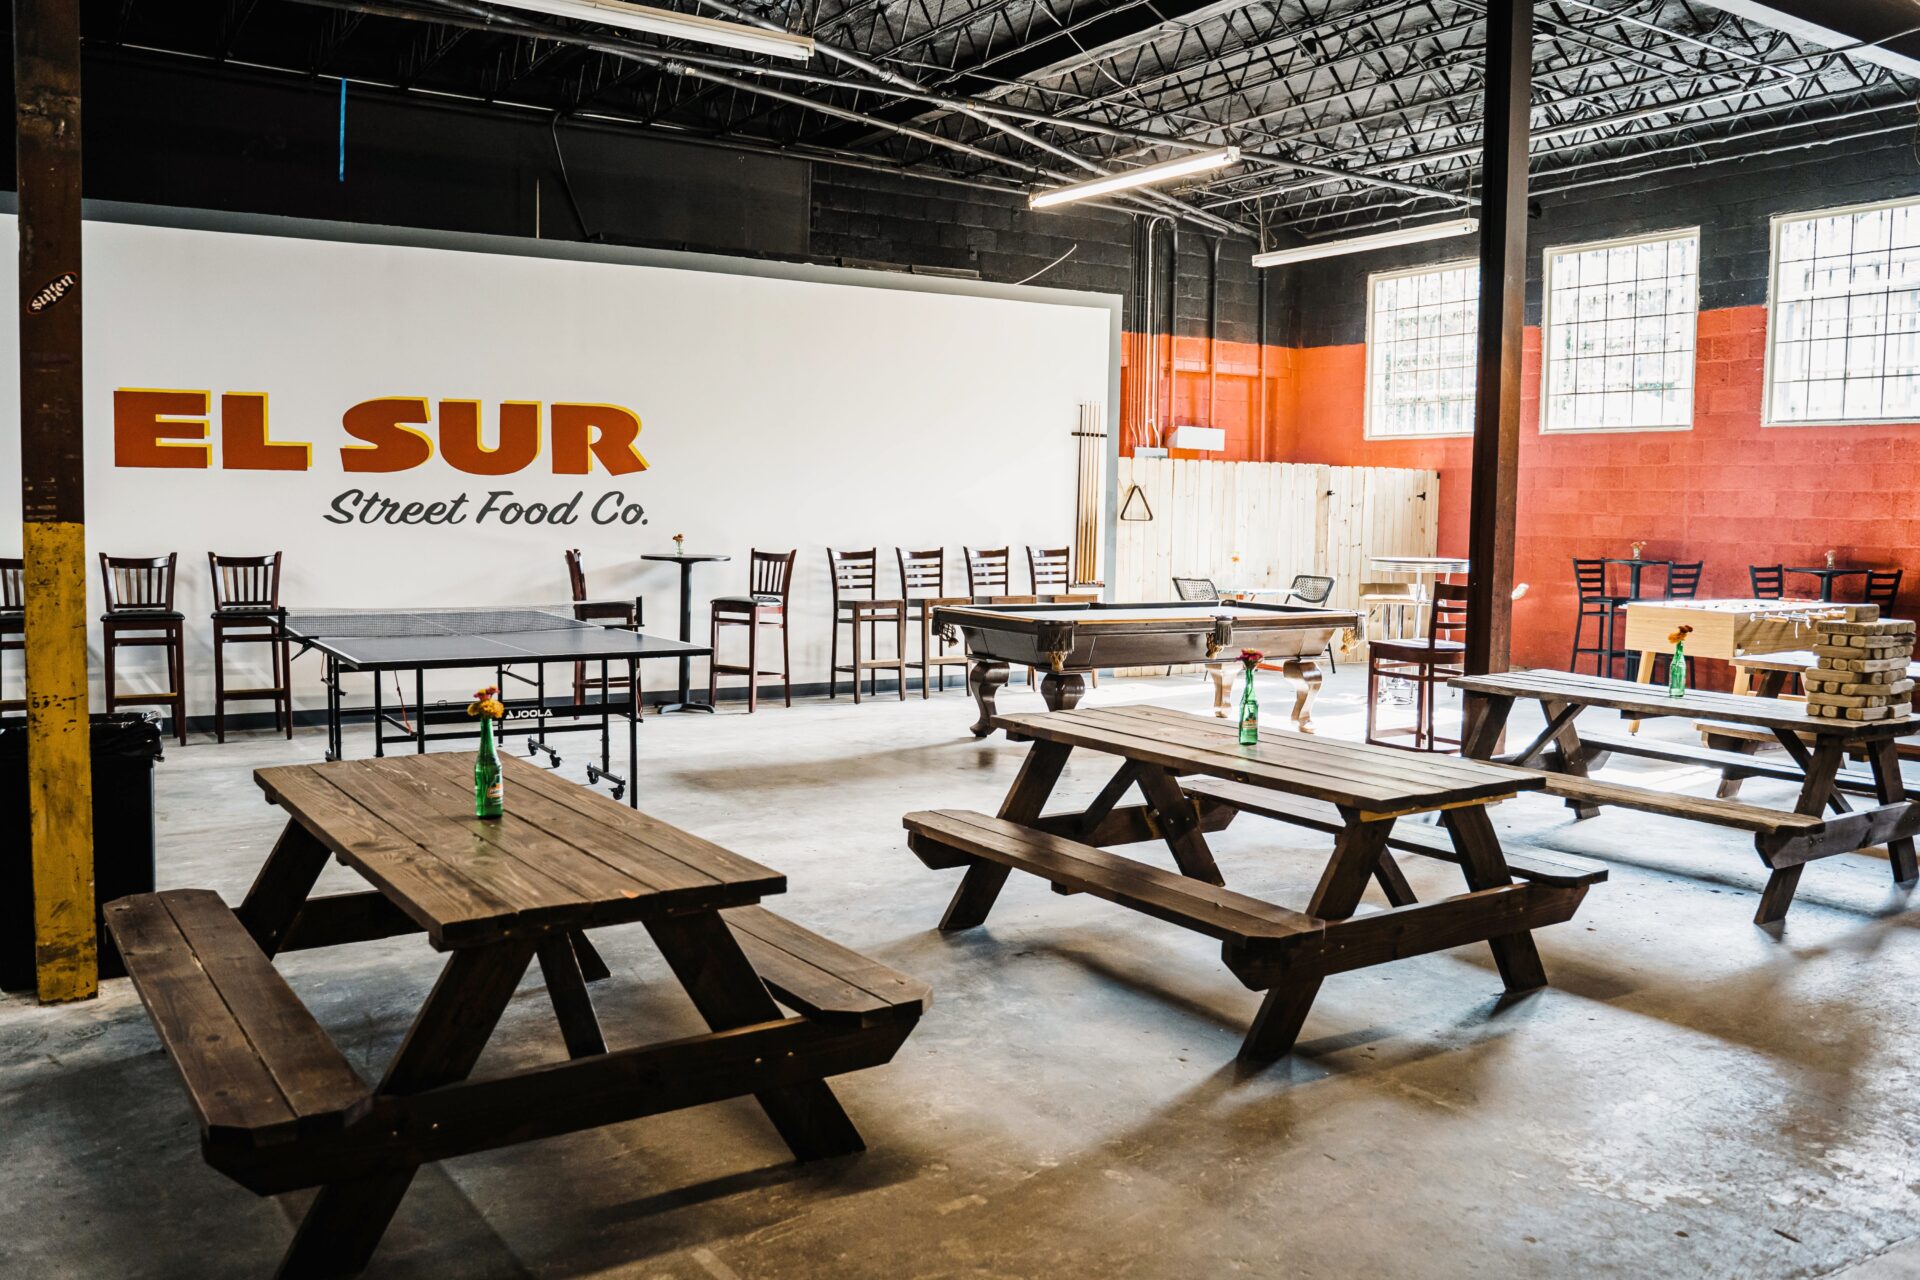 Interior and tables for El Sur Street Food Co. in Little Rock 